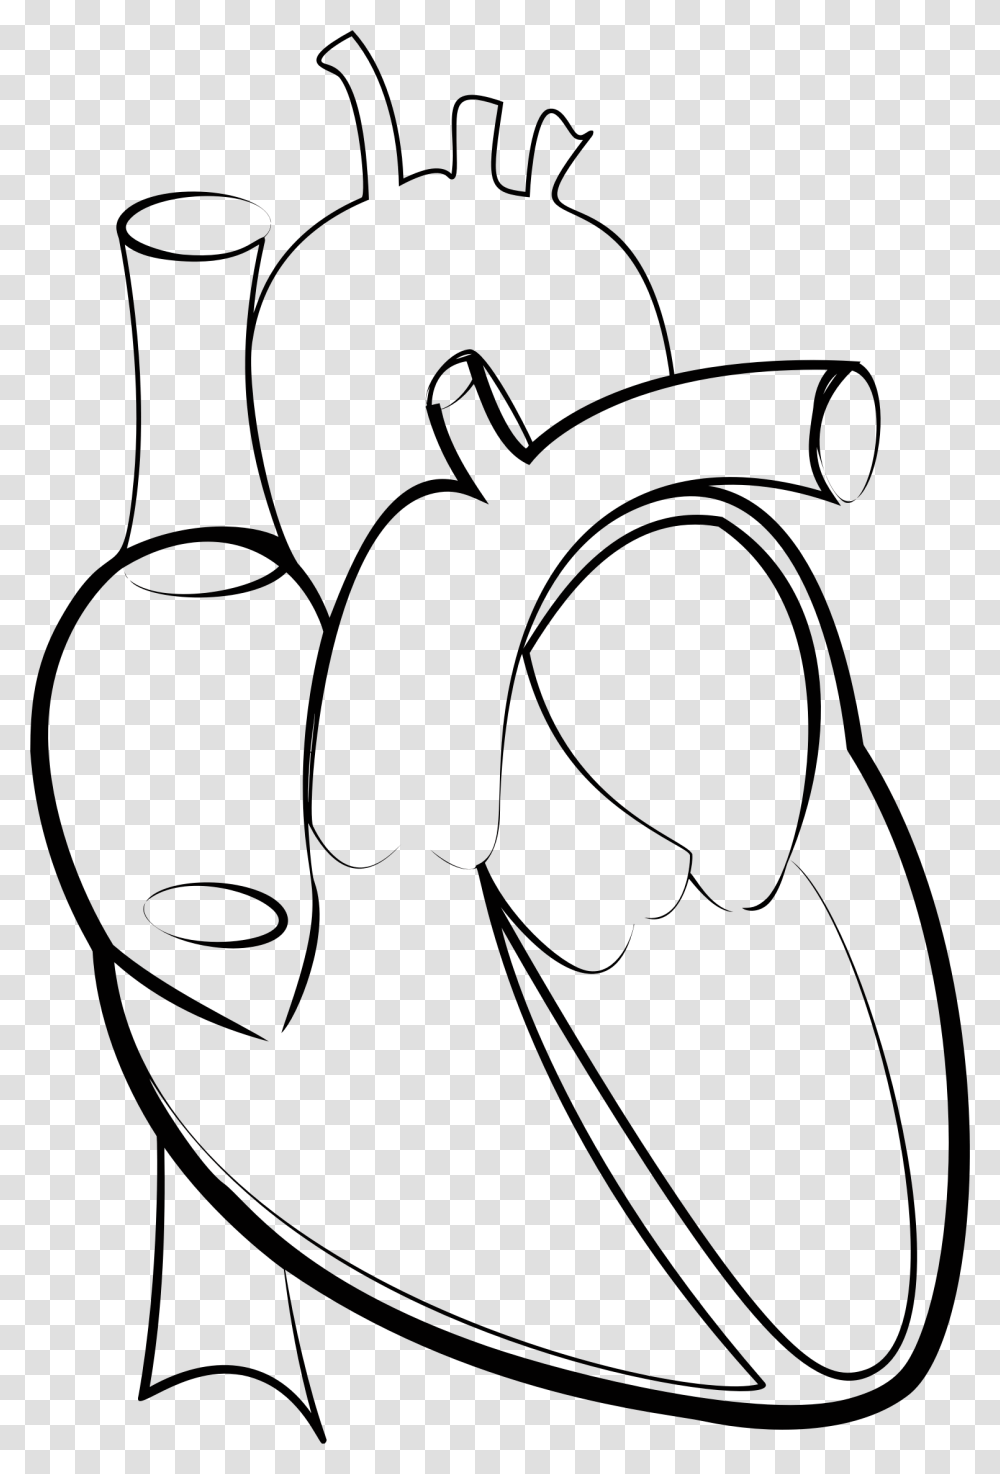 Black Amp White Line Drawing Of Two Love Heart Shapes Outline Images Of Human Heart, Face, Gray Transparent Png